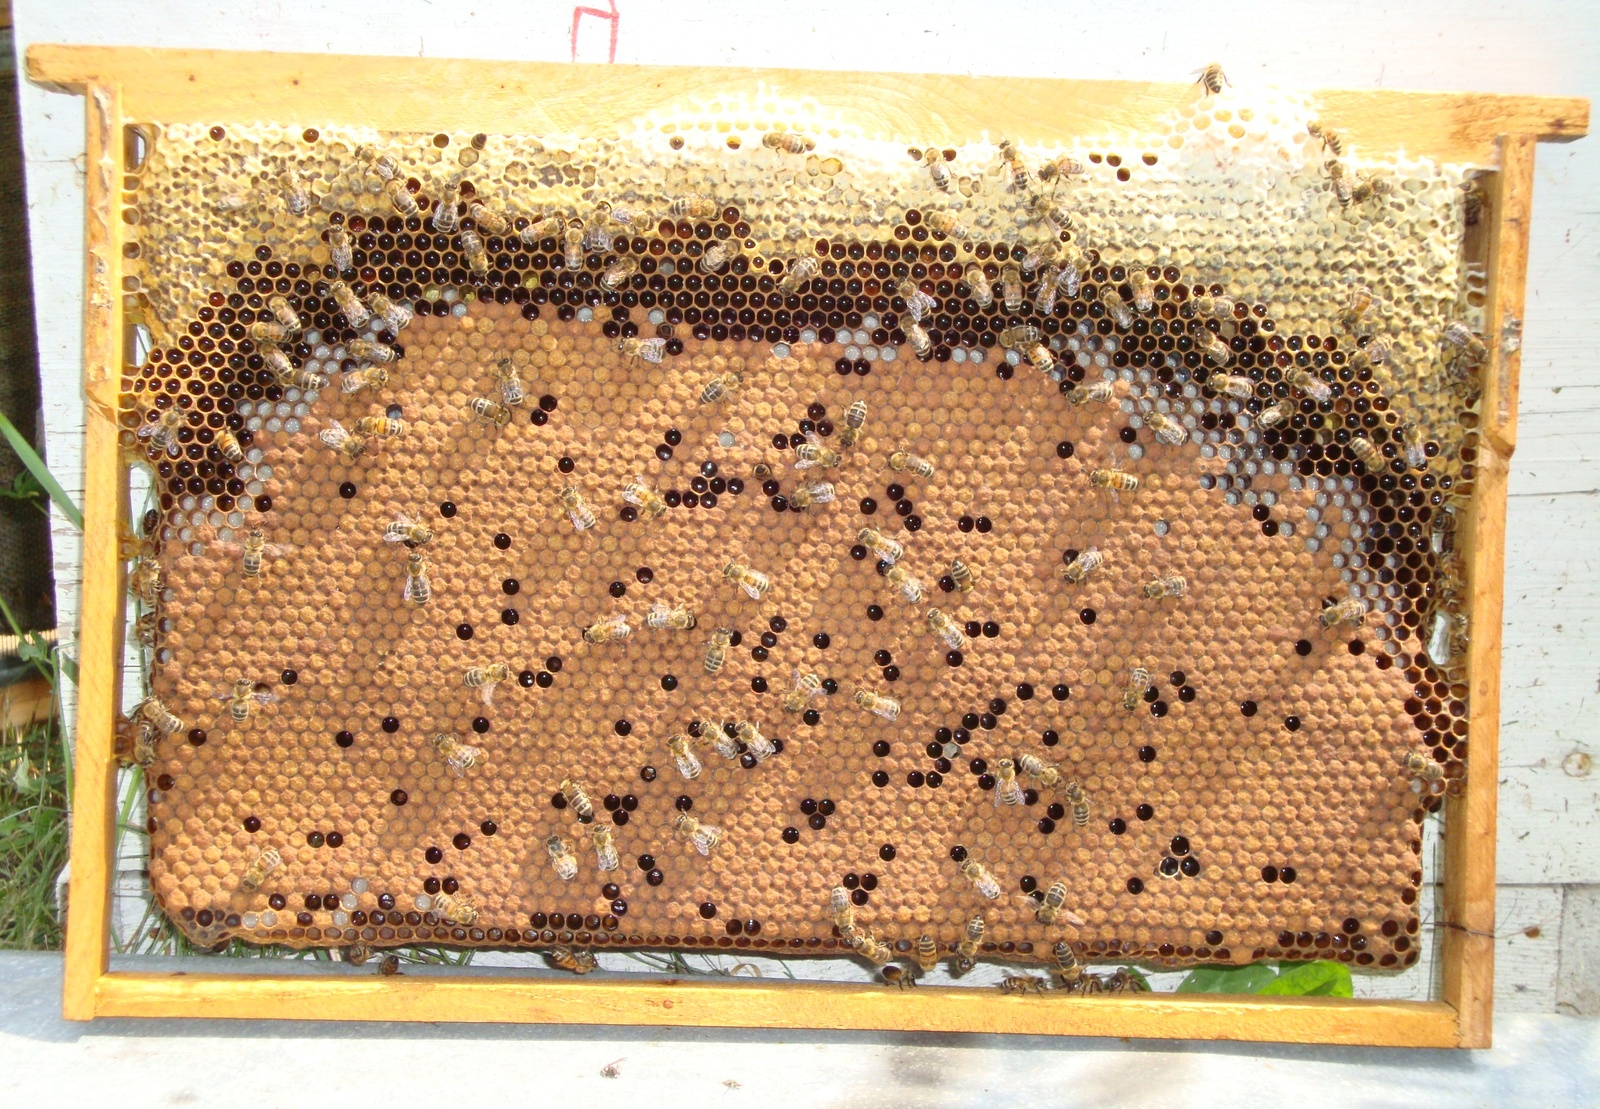 How bees reproduce - Honey, Bees, Reproduction, Roy, Video, Longpost, My